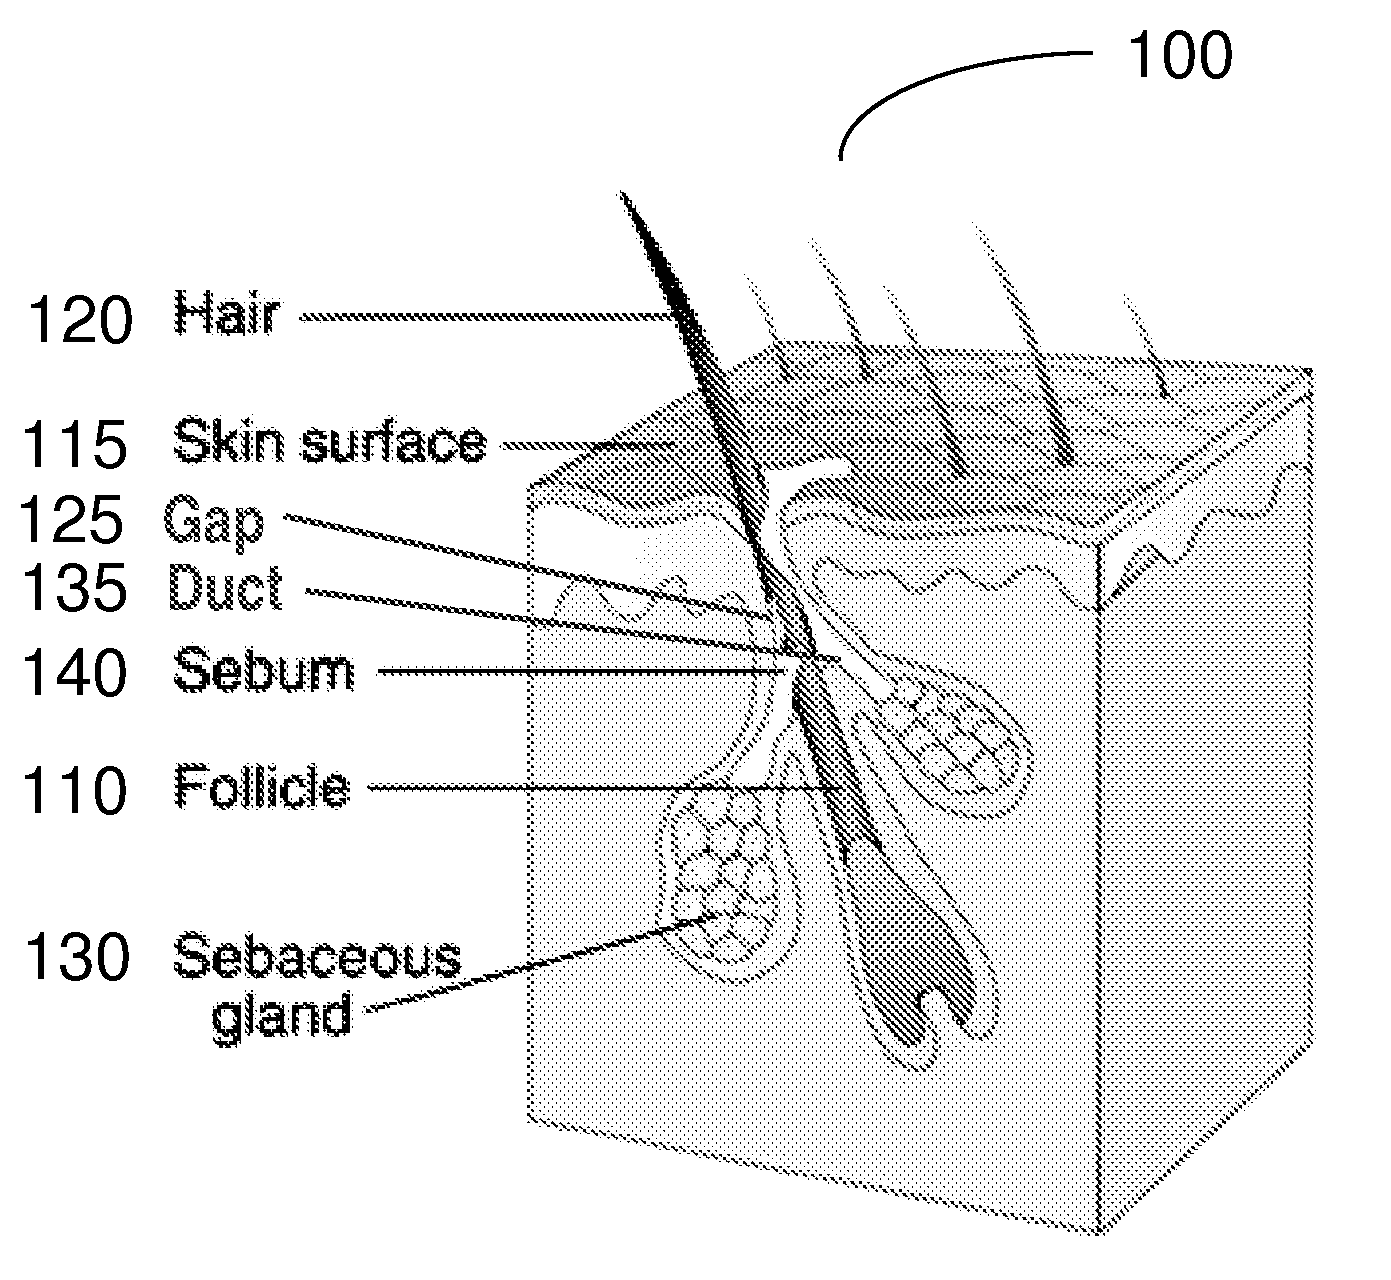 Method and apparatus for dermal delivery of a substance